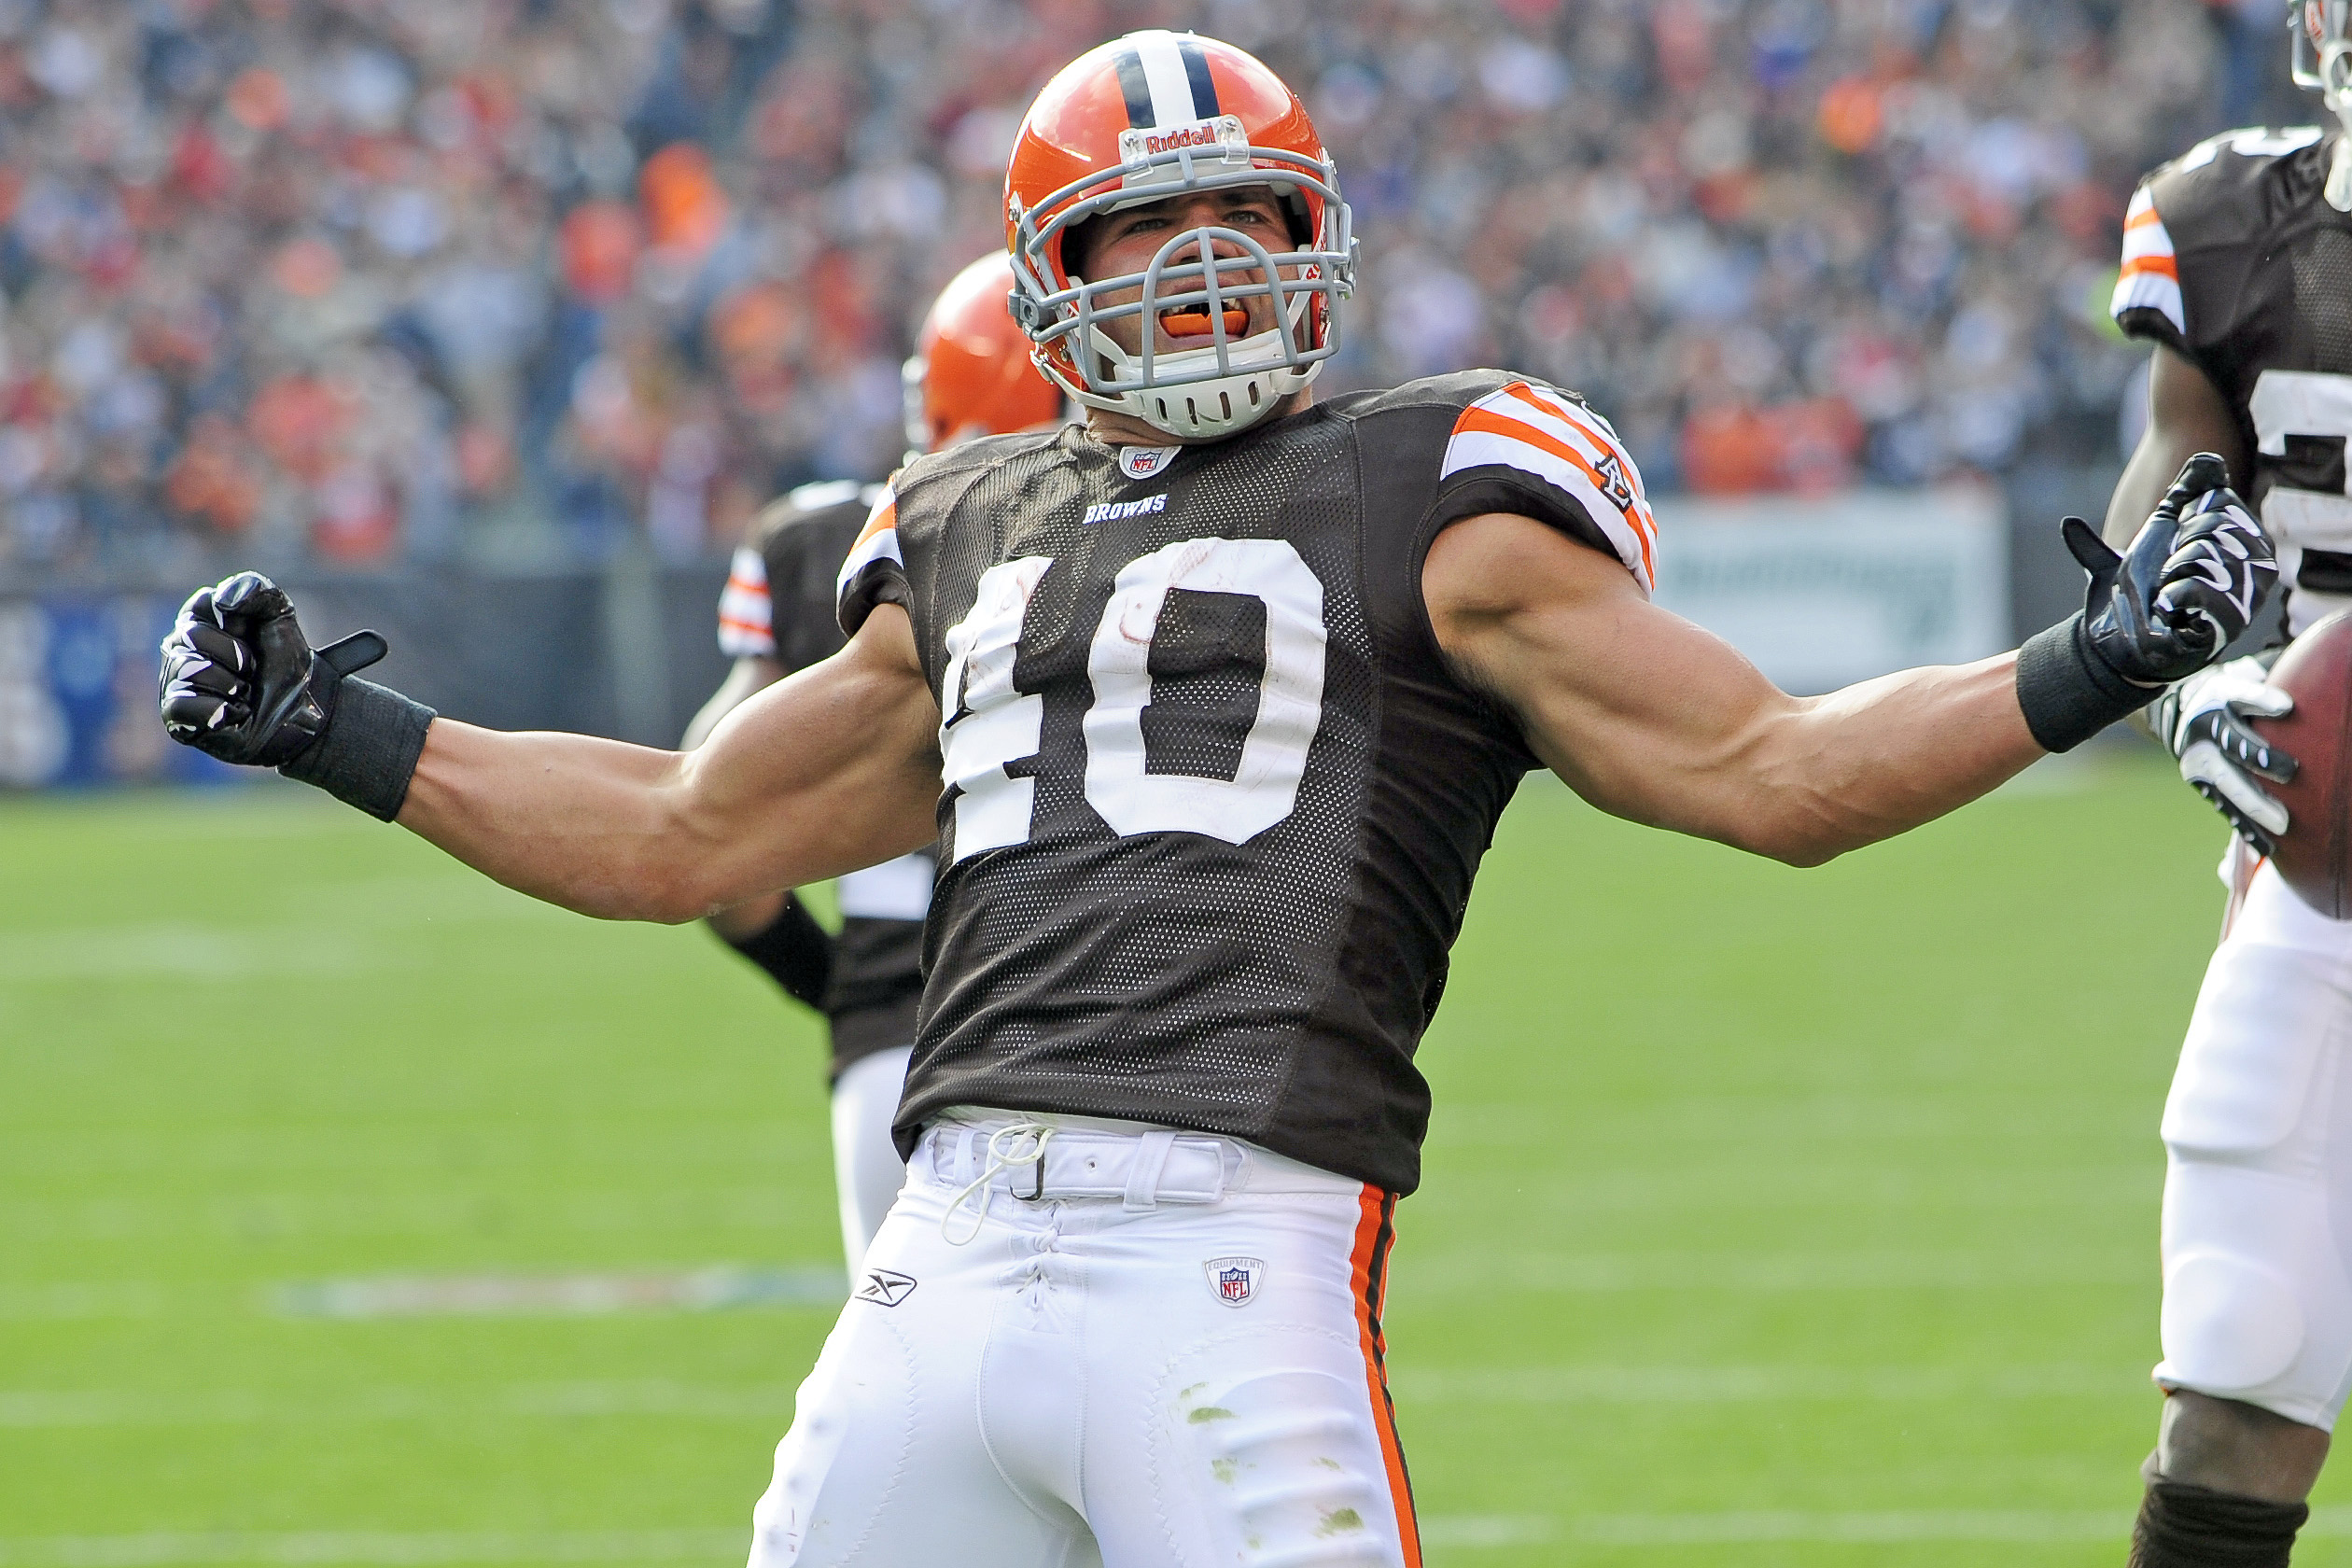 Peyton Hillis of the Cleveland Browns.